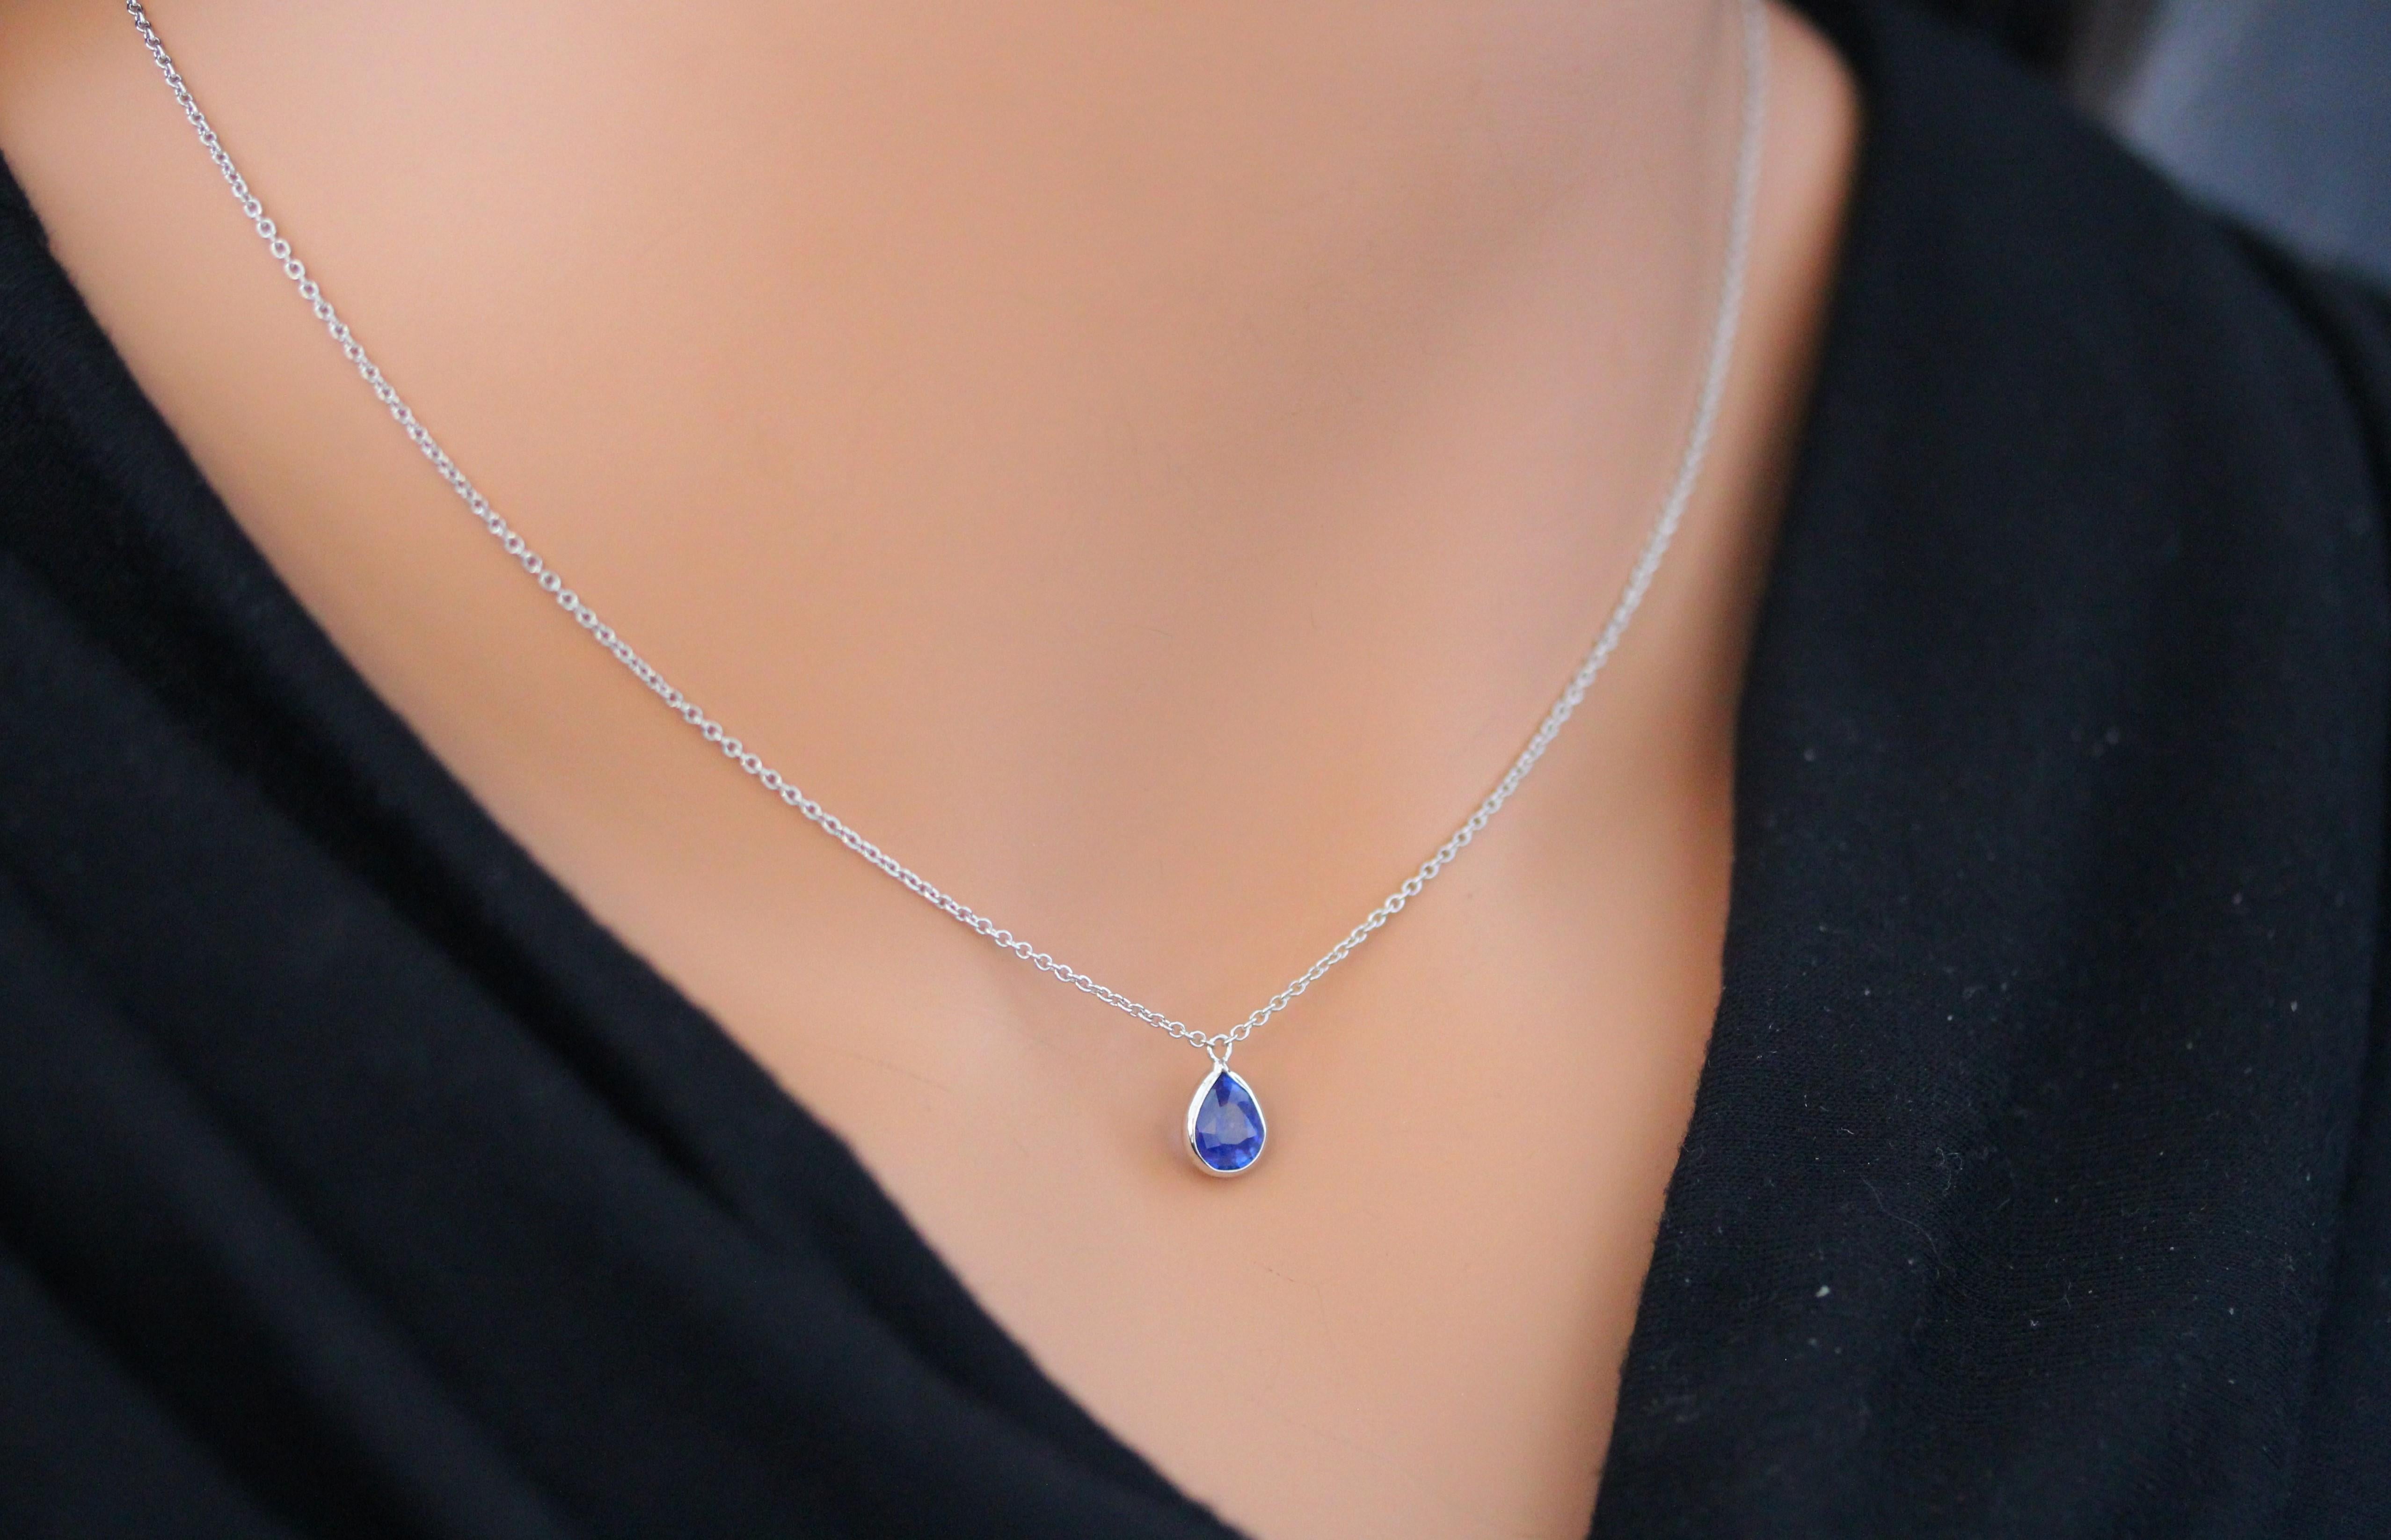 Pear Cut 1.49 Carat Pear Sapphire Blue Fashion Necklaces In 14k White Gold For Sale